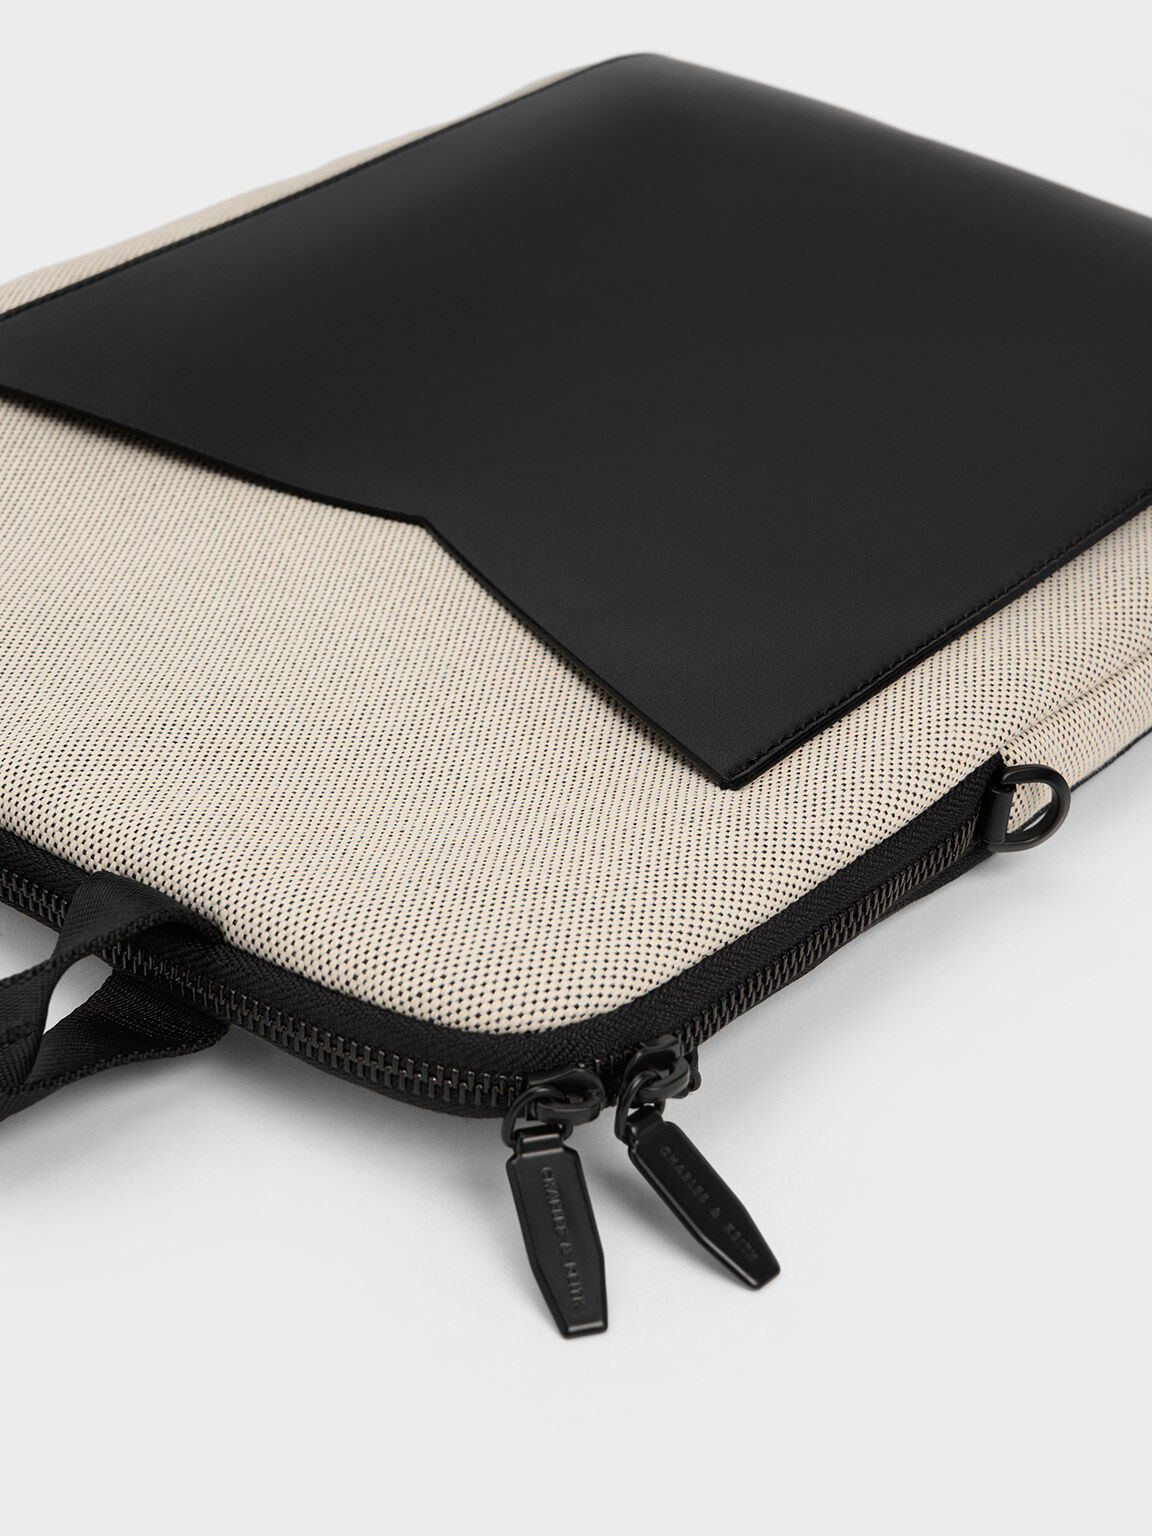 Stylish and Durable Black Laptop Bag with Strap